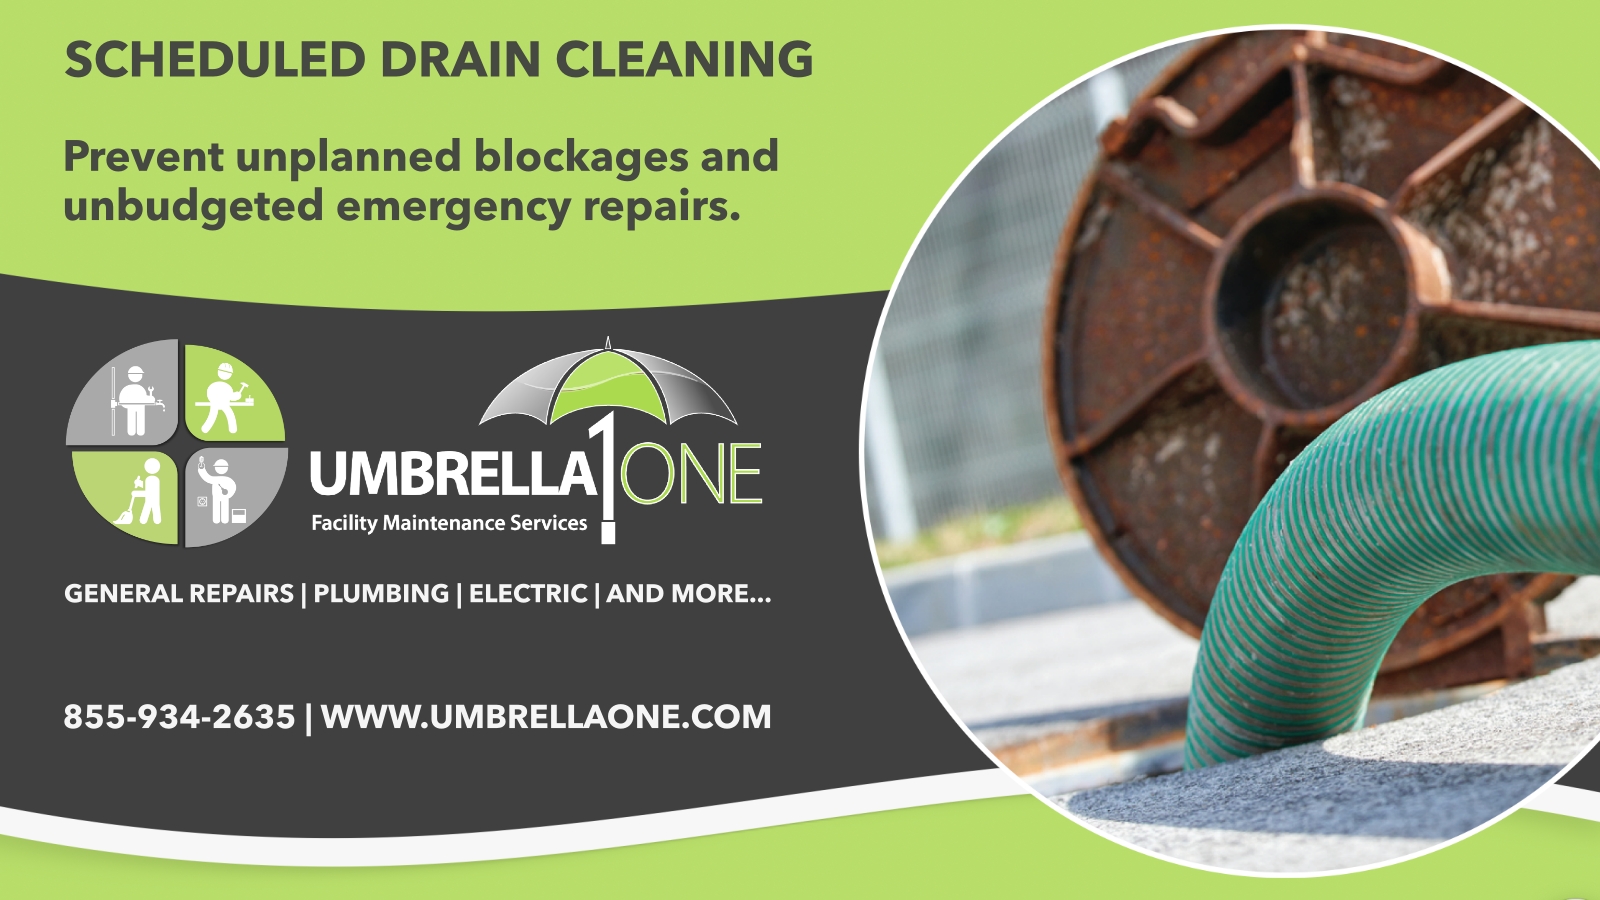 Scheduled drain cleaning